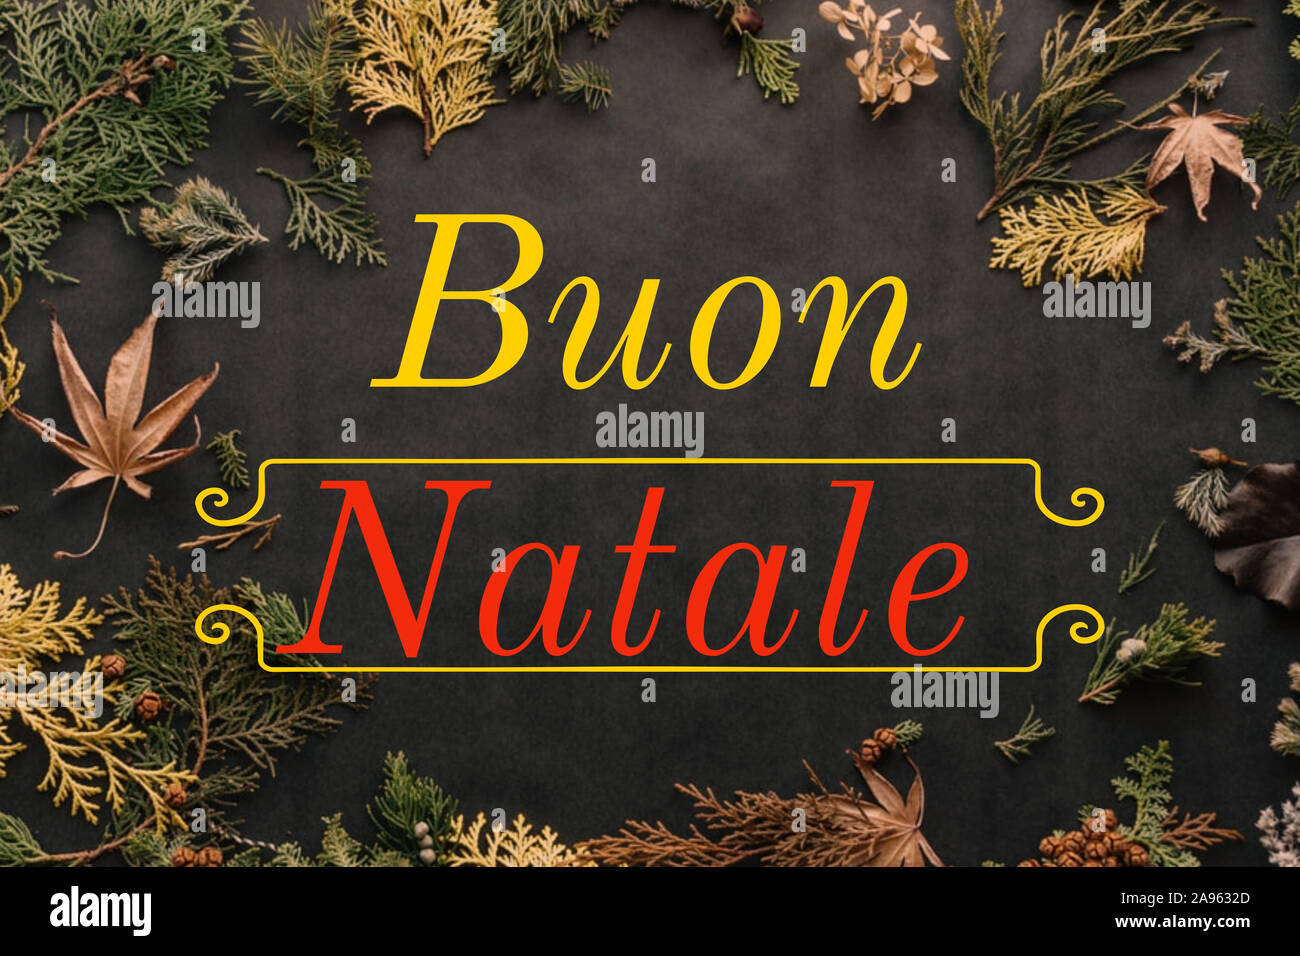 Wallpaper Buon Natale.Natale Illustration High Resolution Stock Photography And Images Alamy